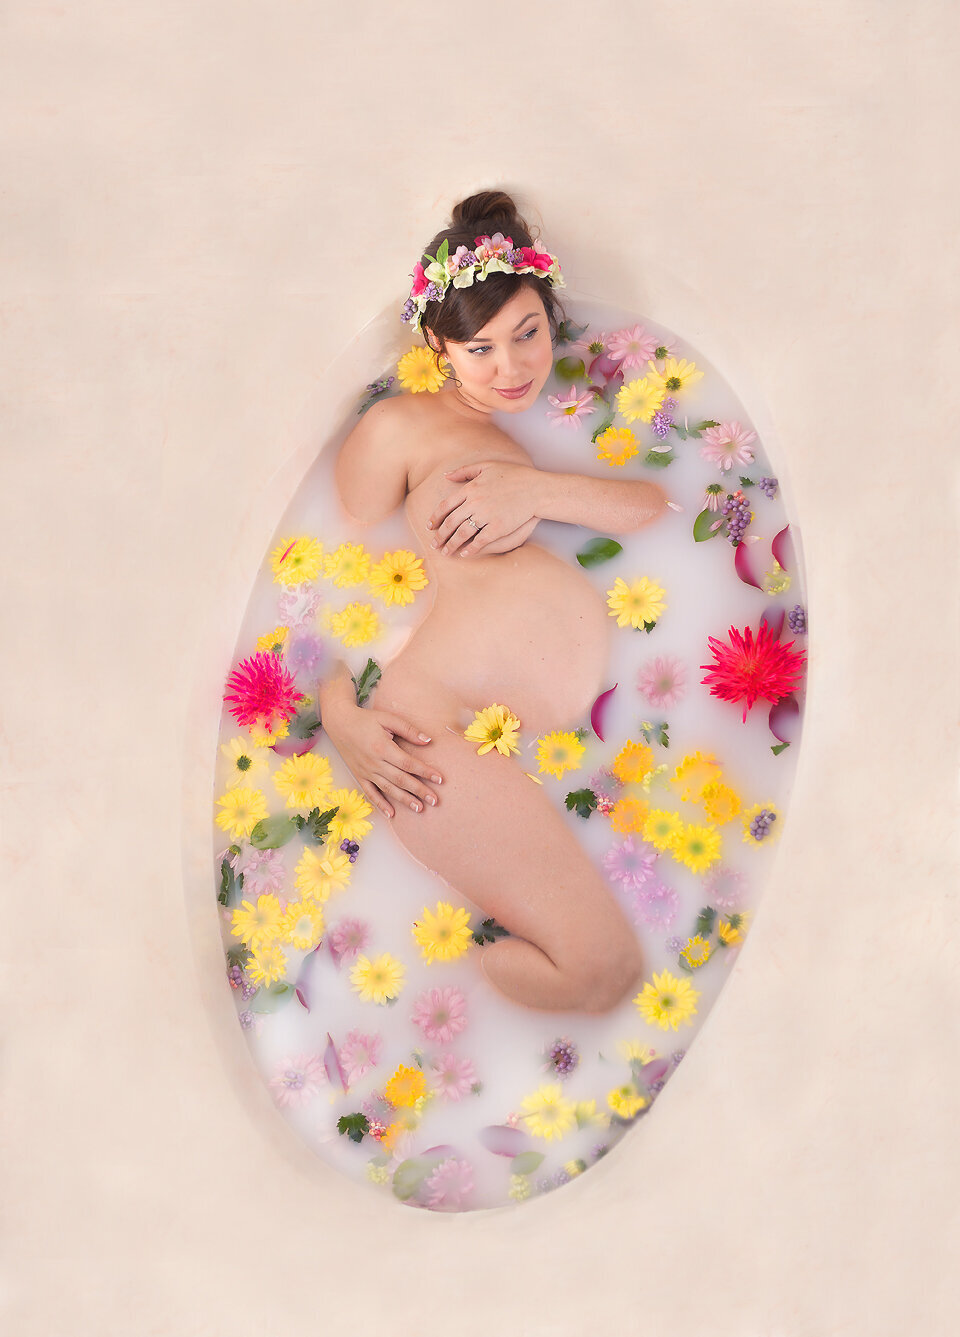 Women laying in tub, pregnant during maternity photoshoot in Mount Juliet Tennessee photography studio